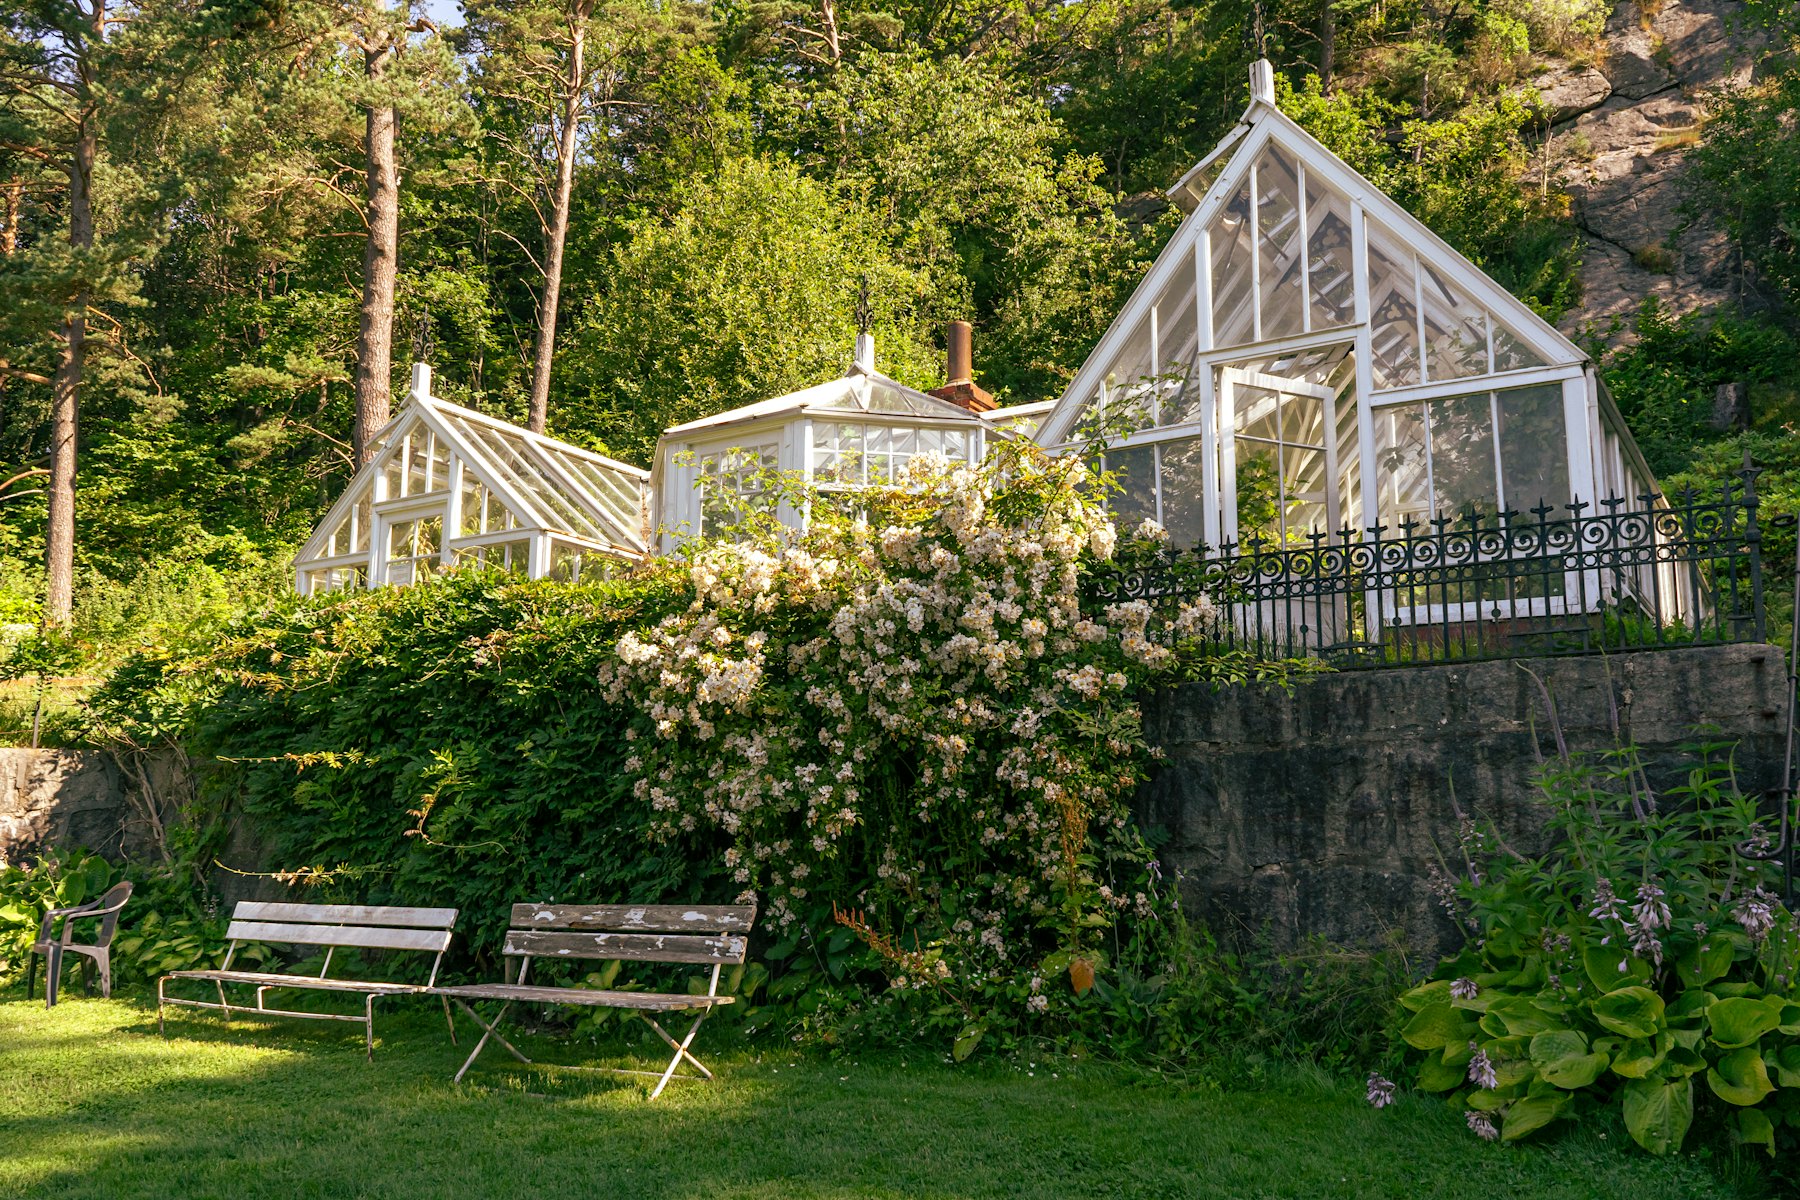 A white greenhouse among green plants and trees, with two benches in front. Photo